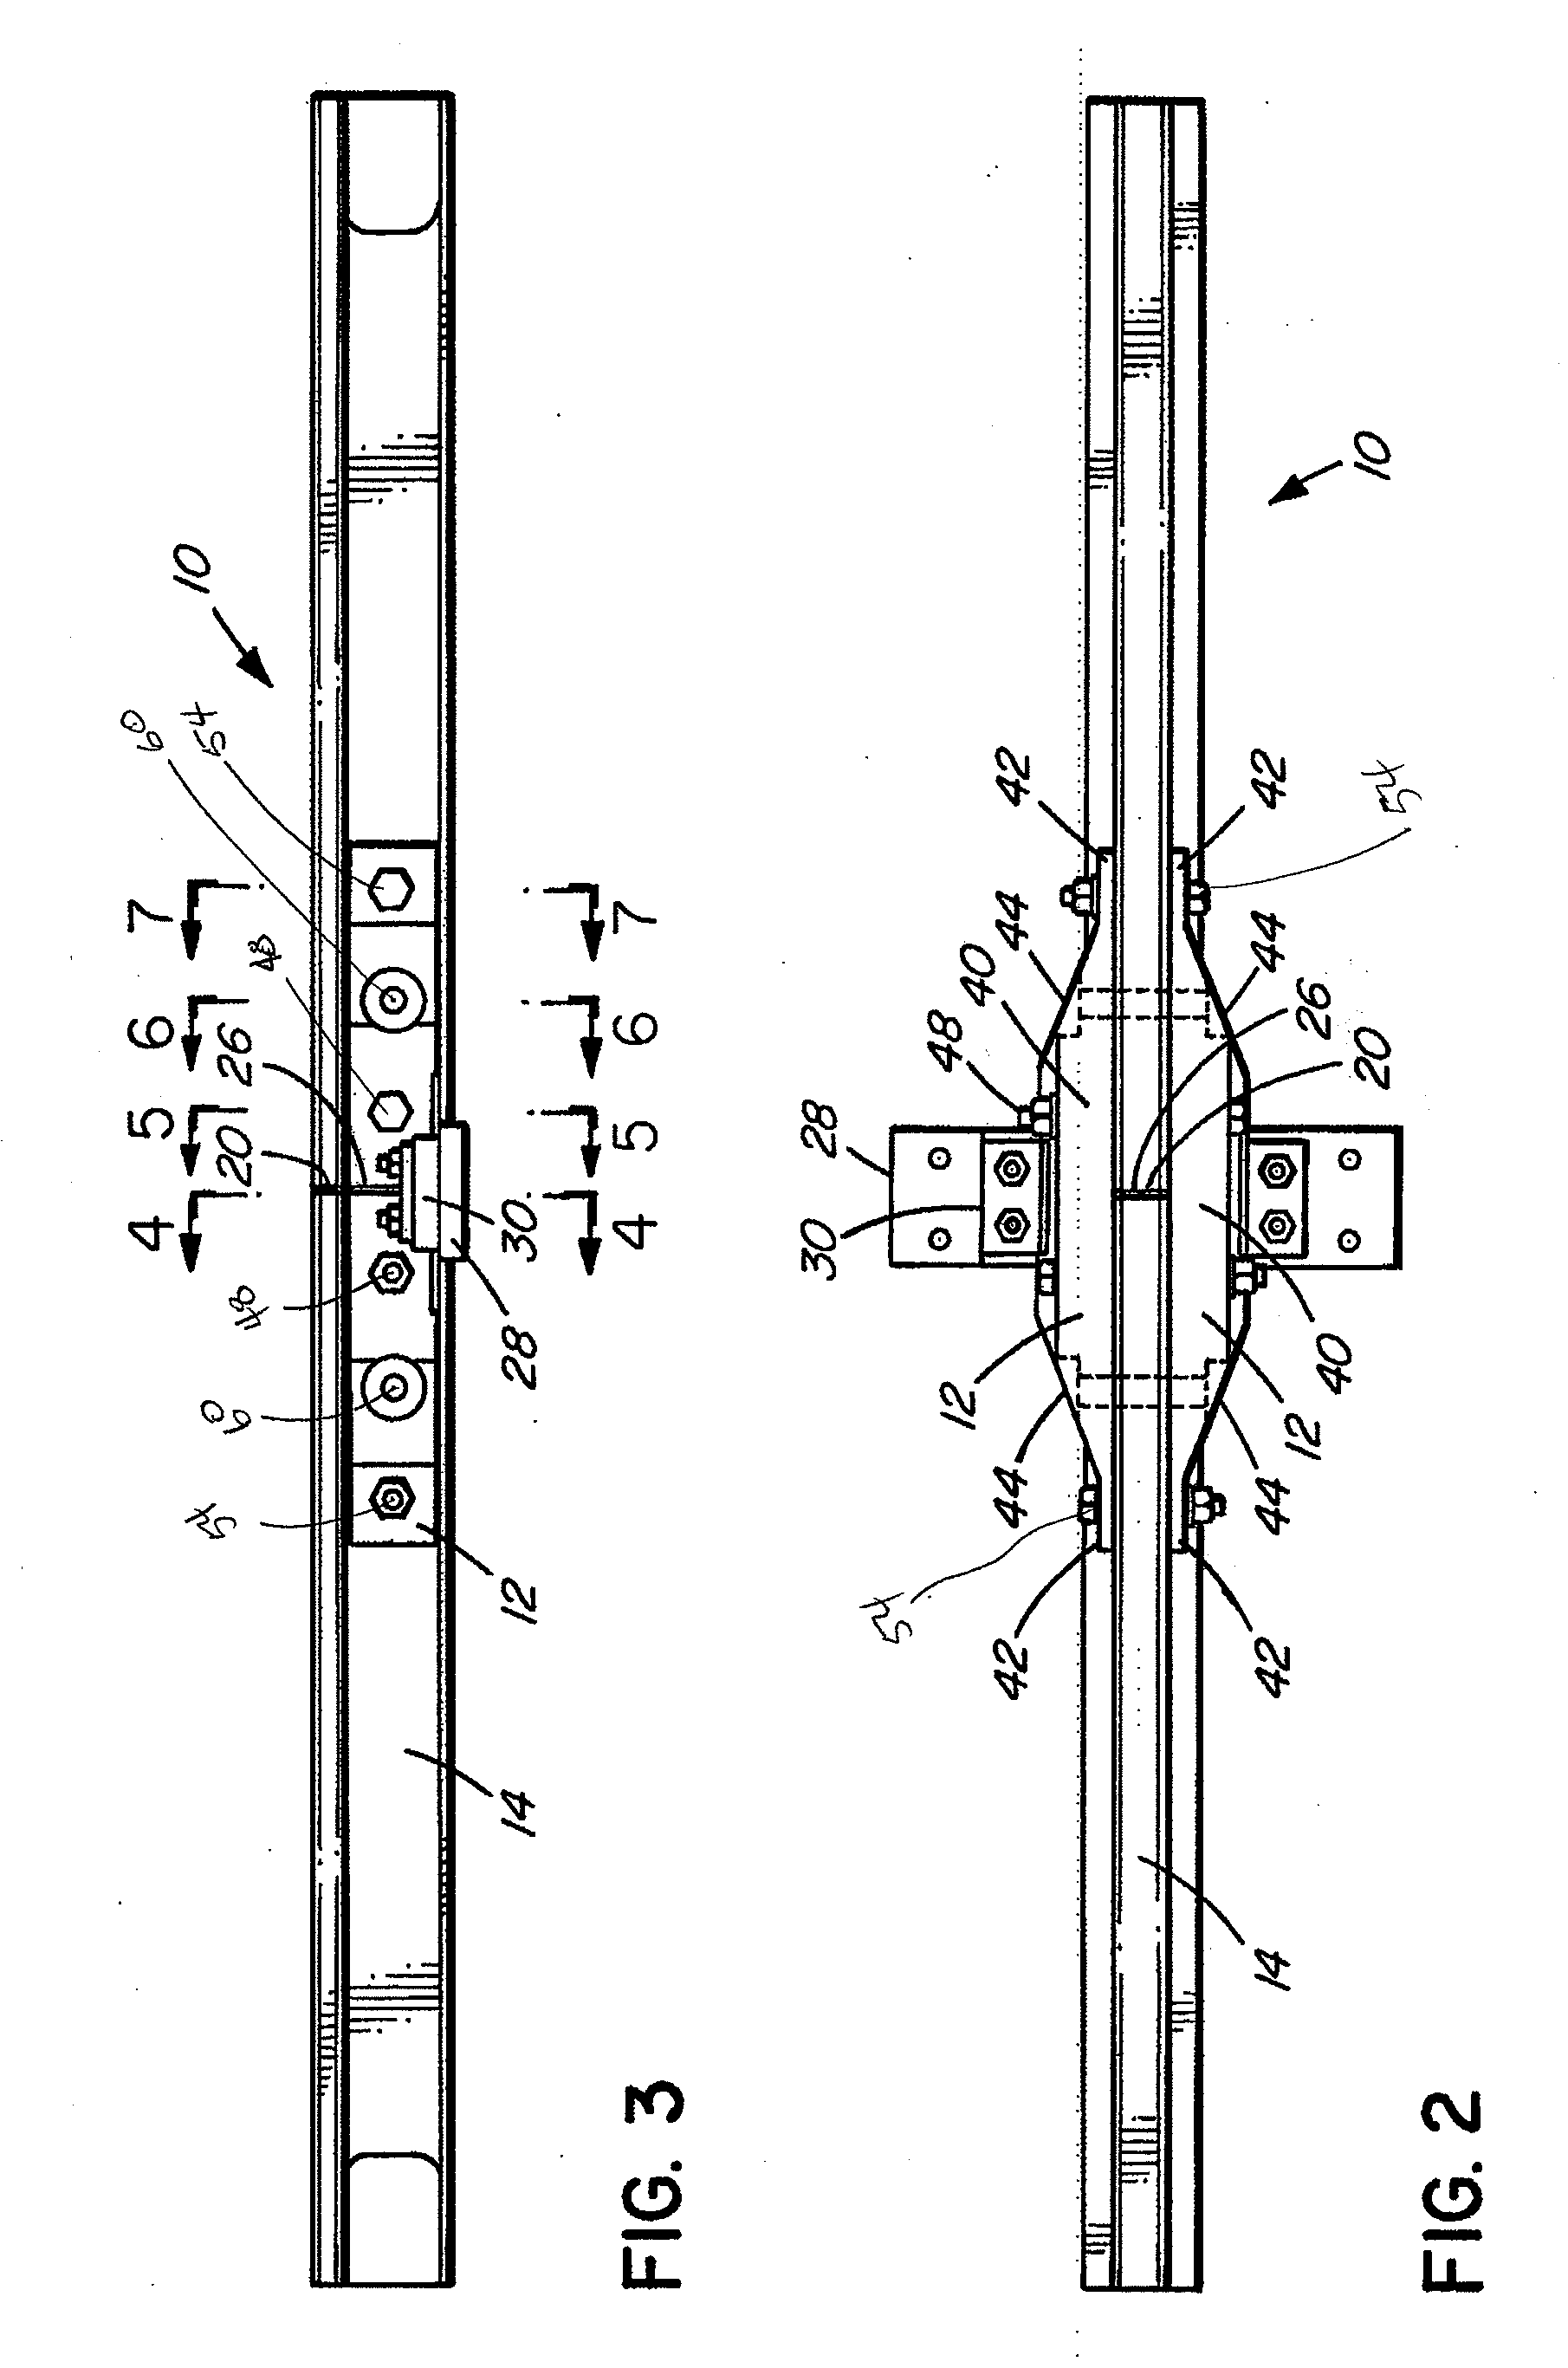 Insulated rail joint assembly